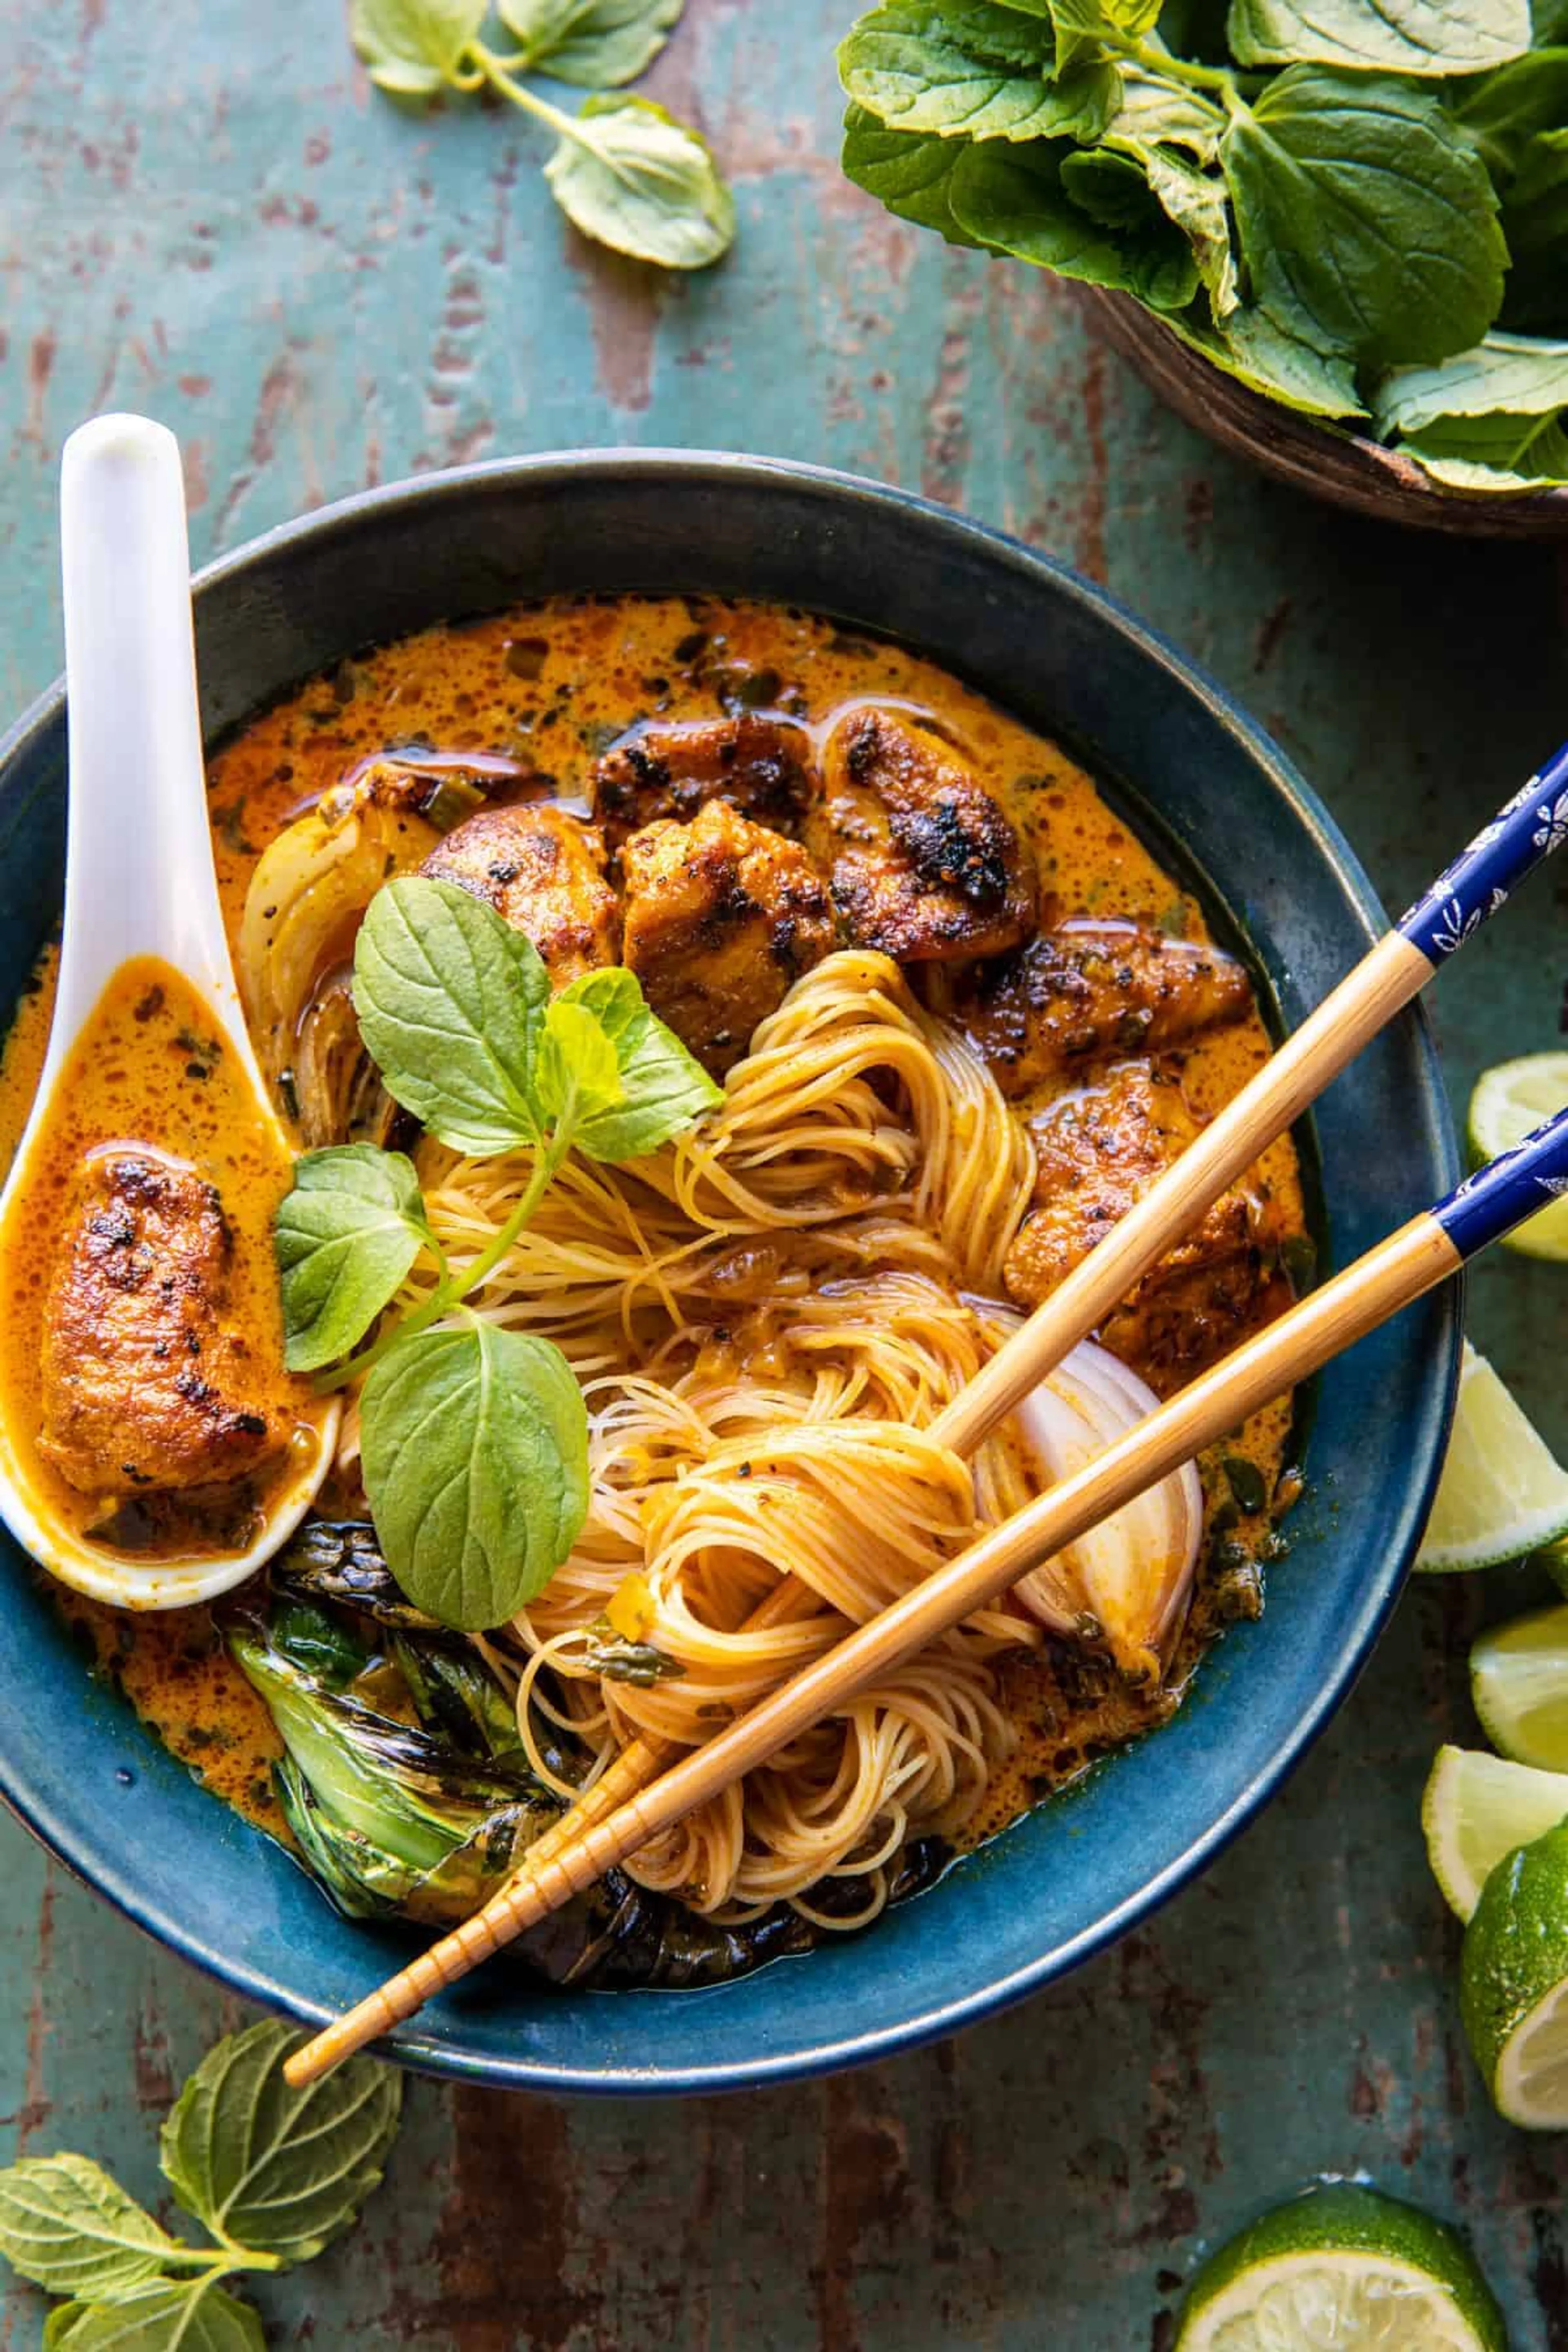 30 Minute Creamy Thai Turmeric Chicken and Noodles.